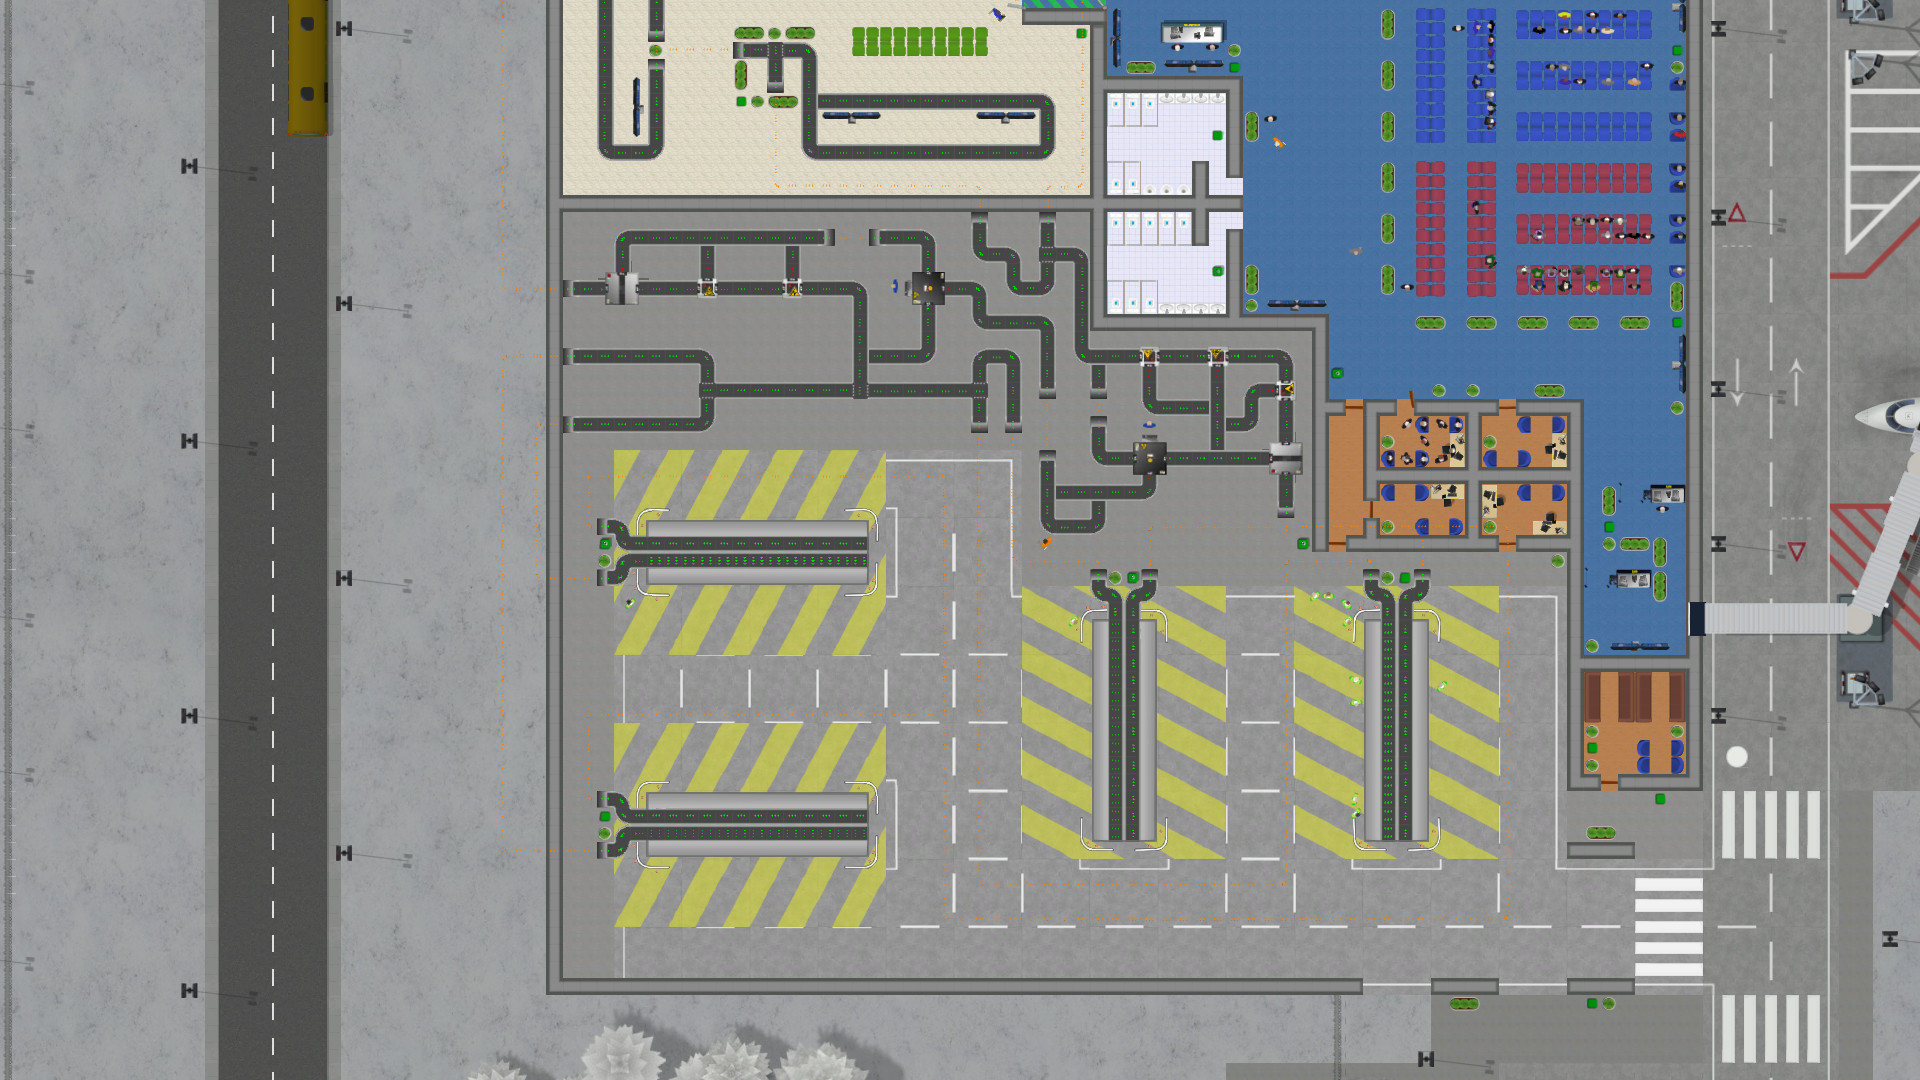 airport ceo download